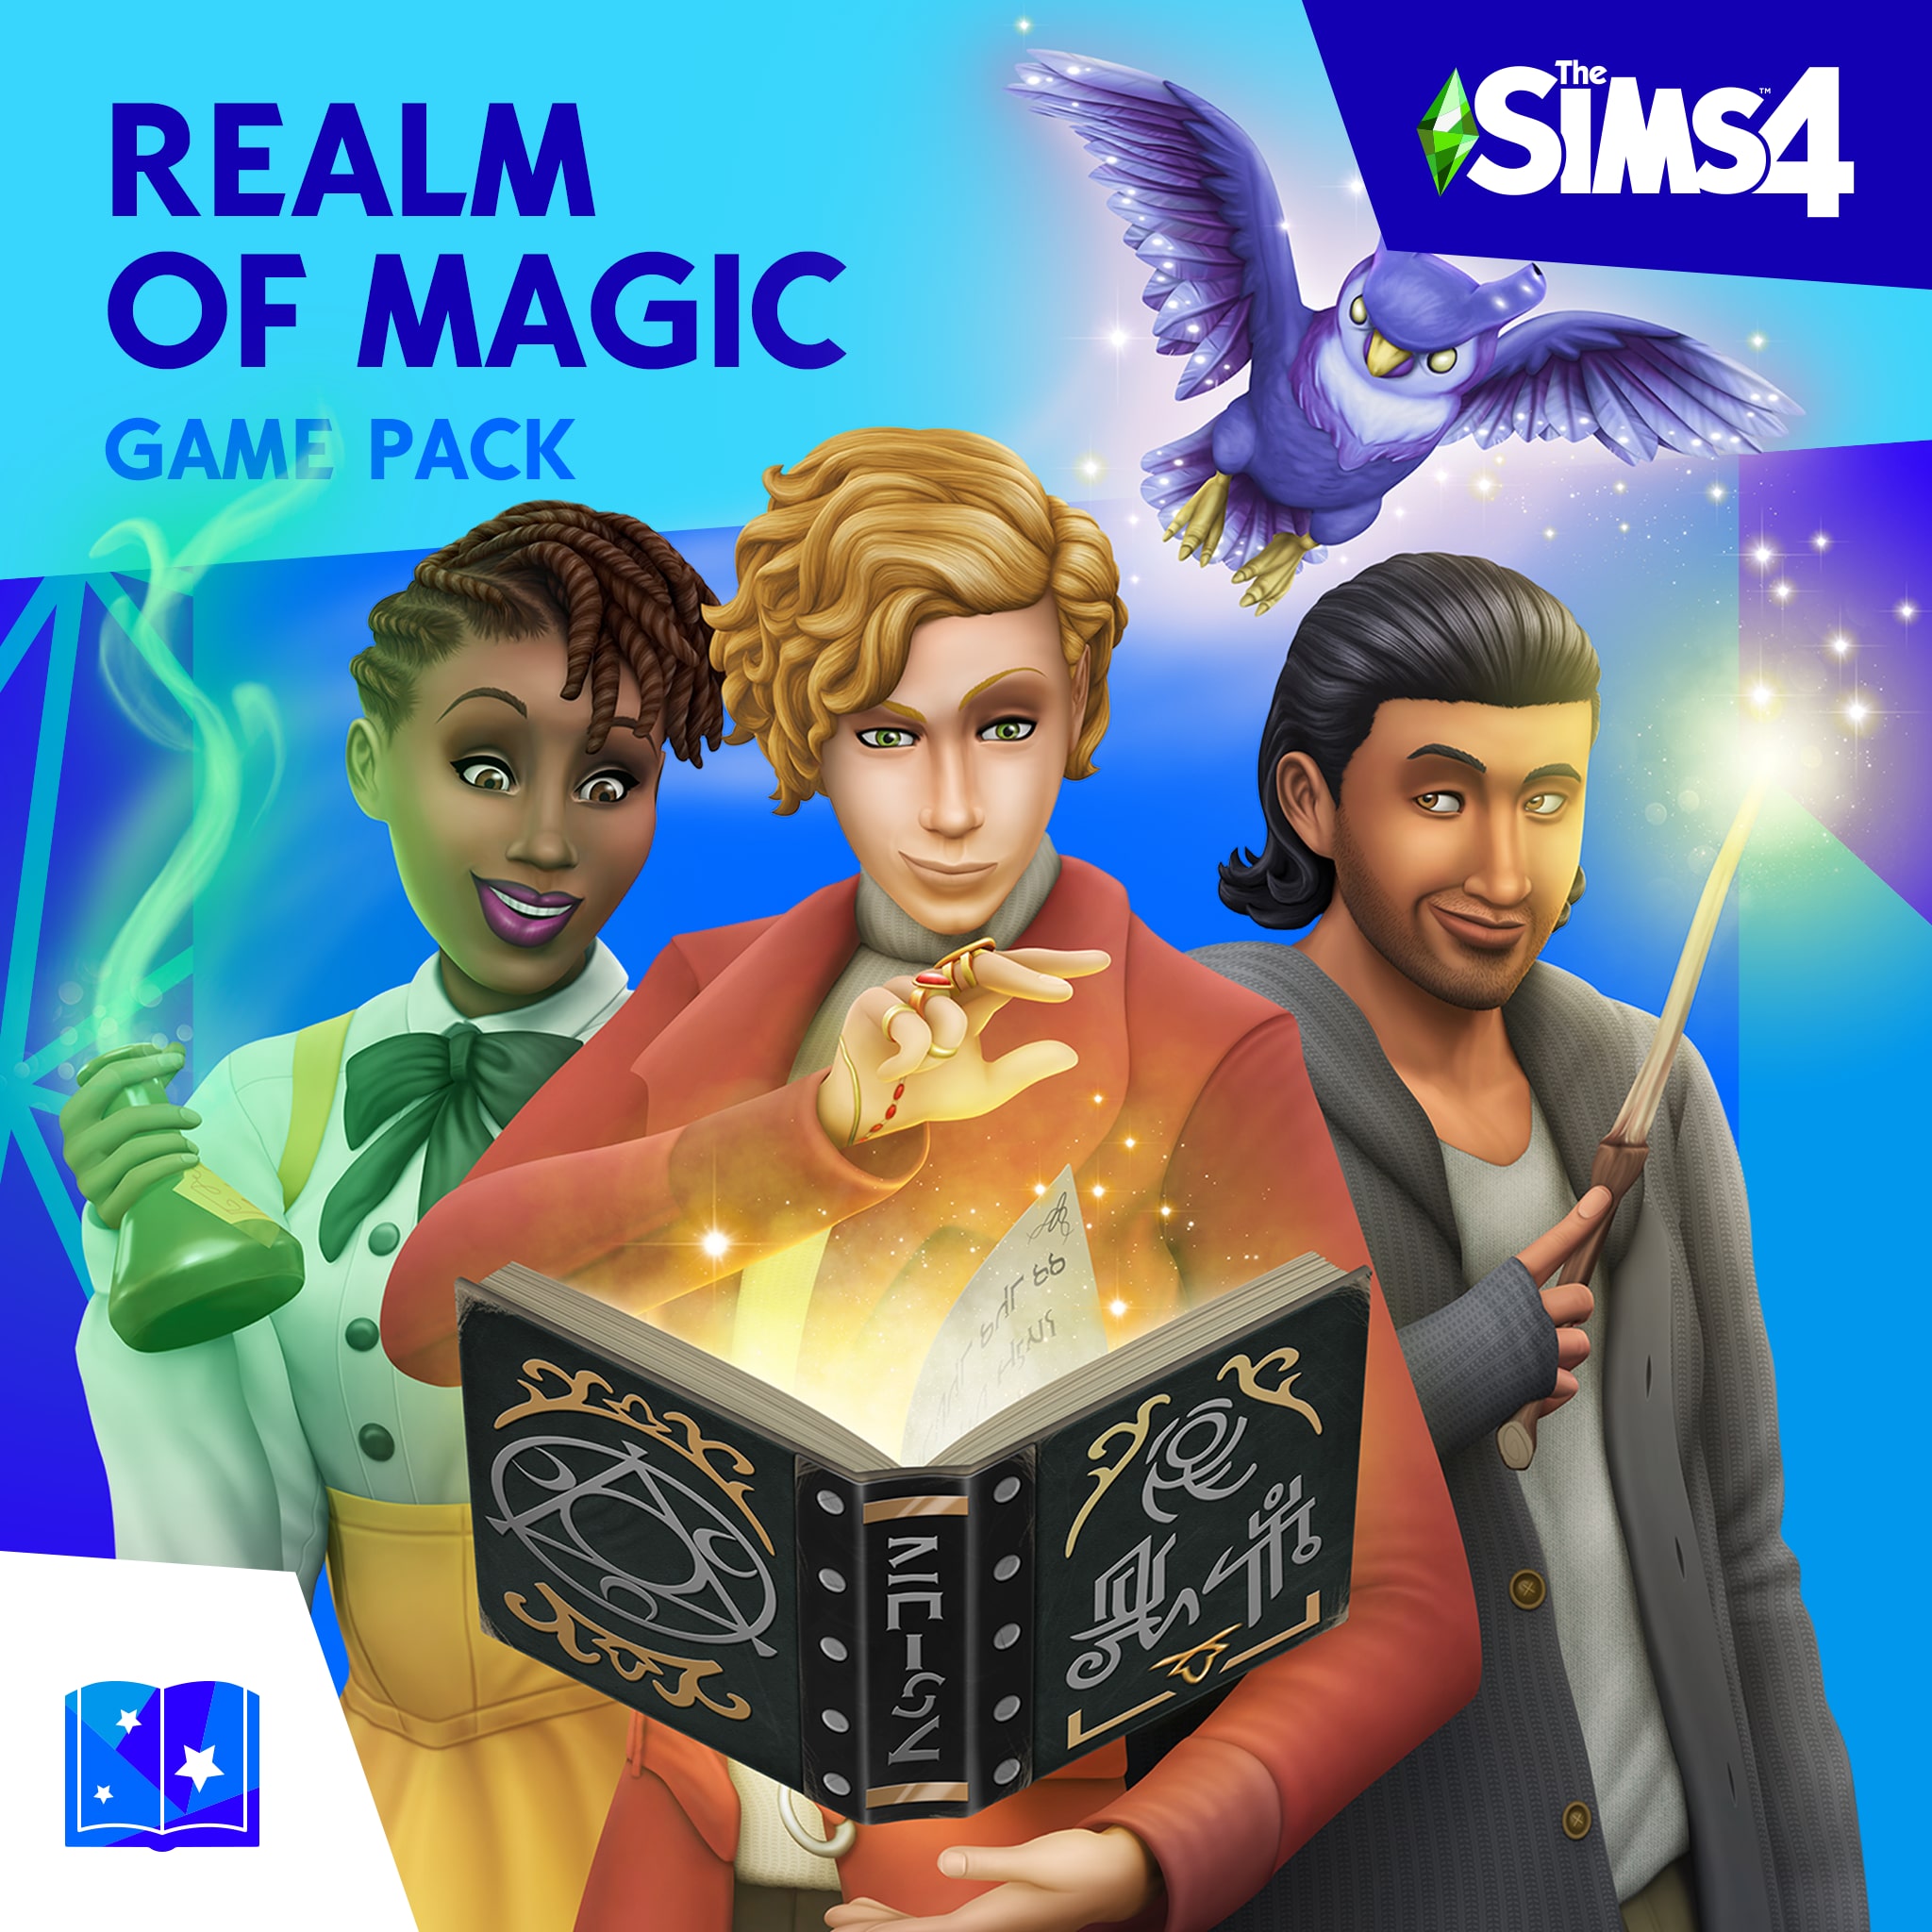 sims 4 realm of magic download crack